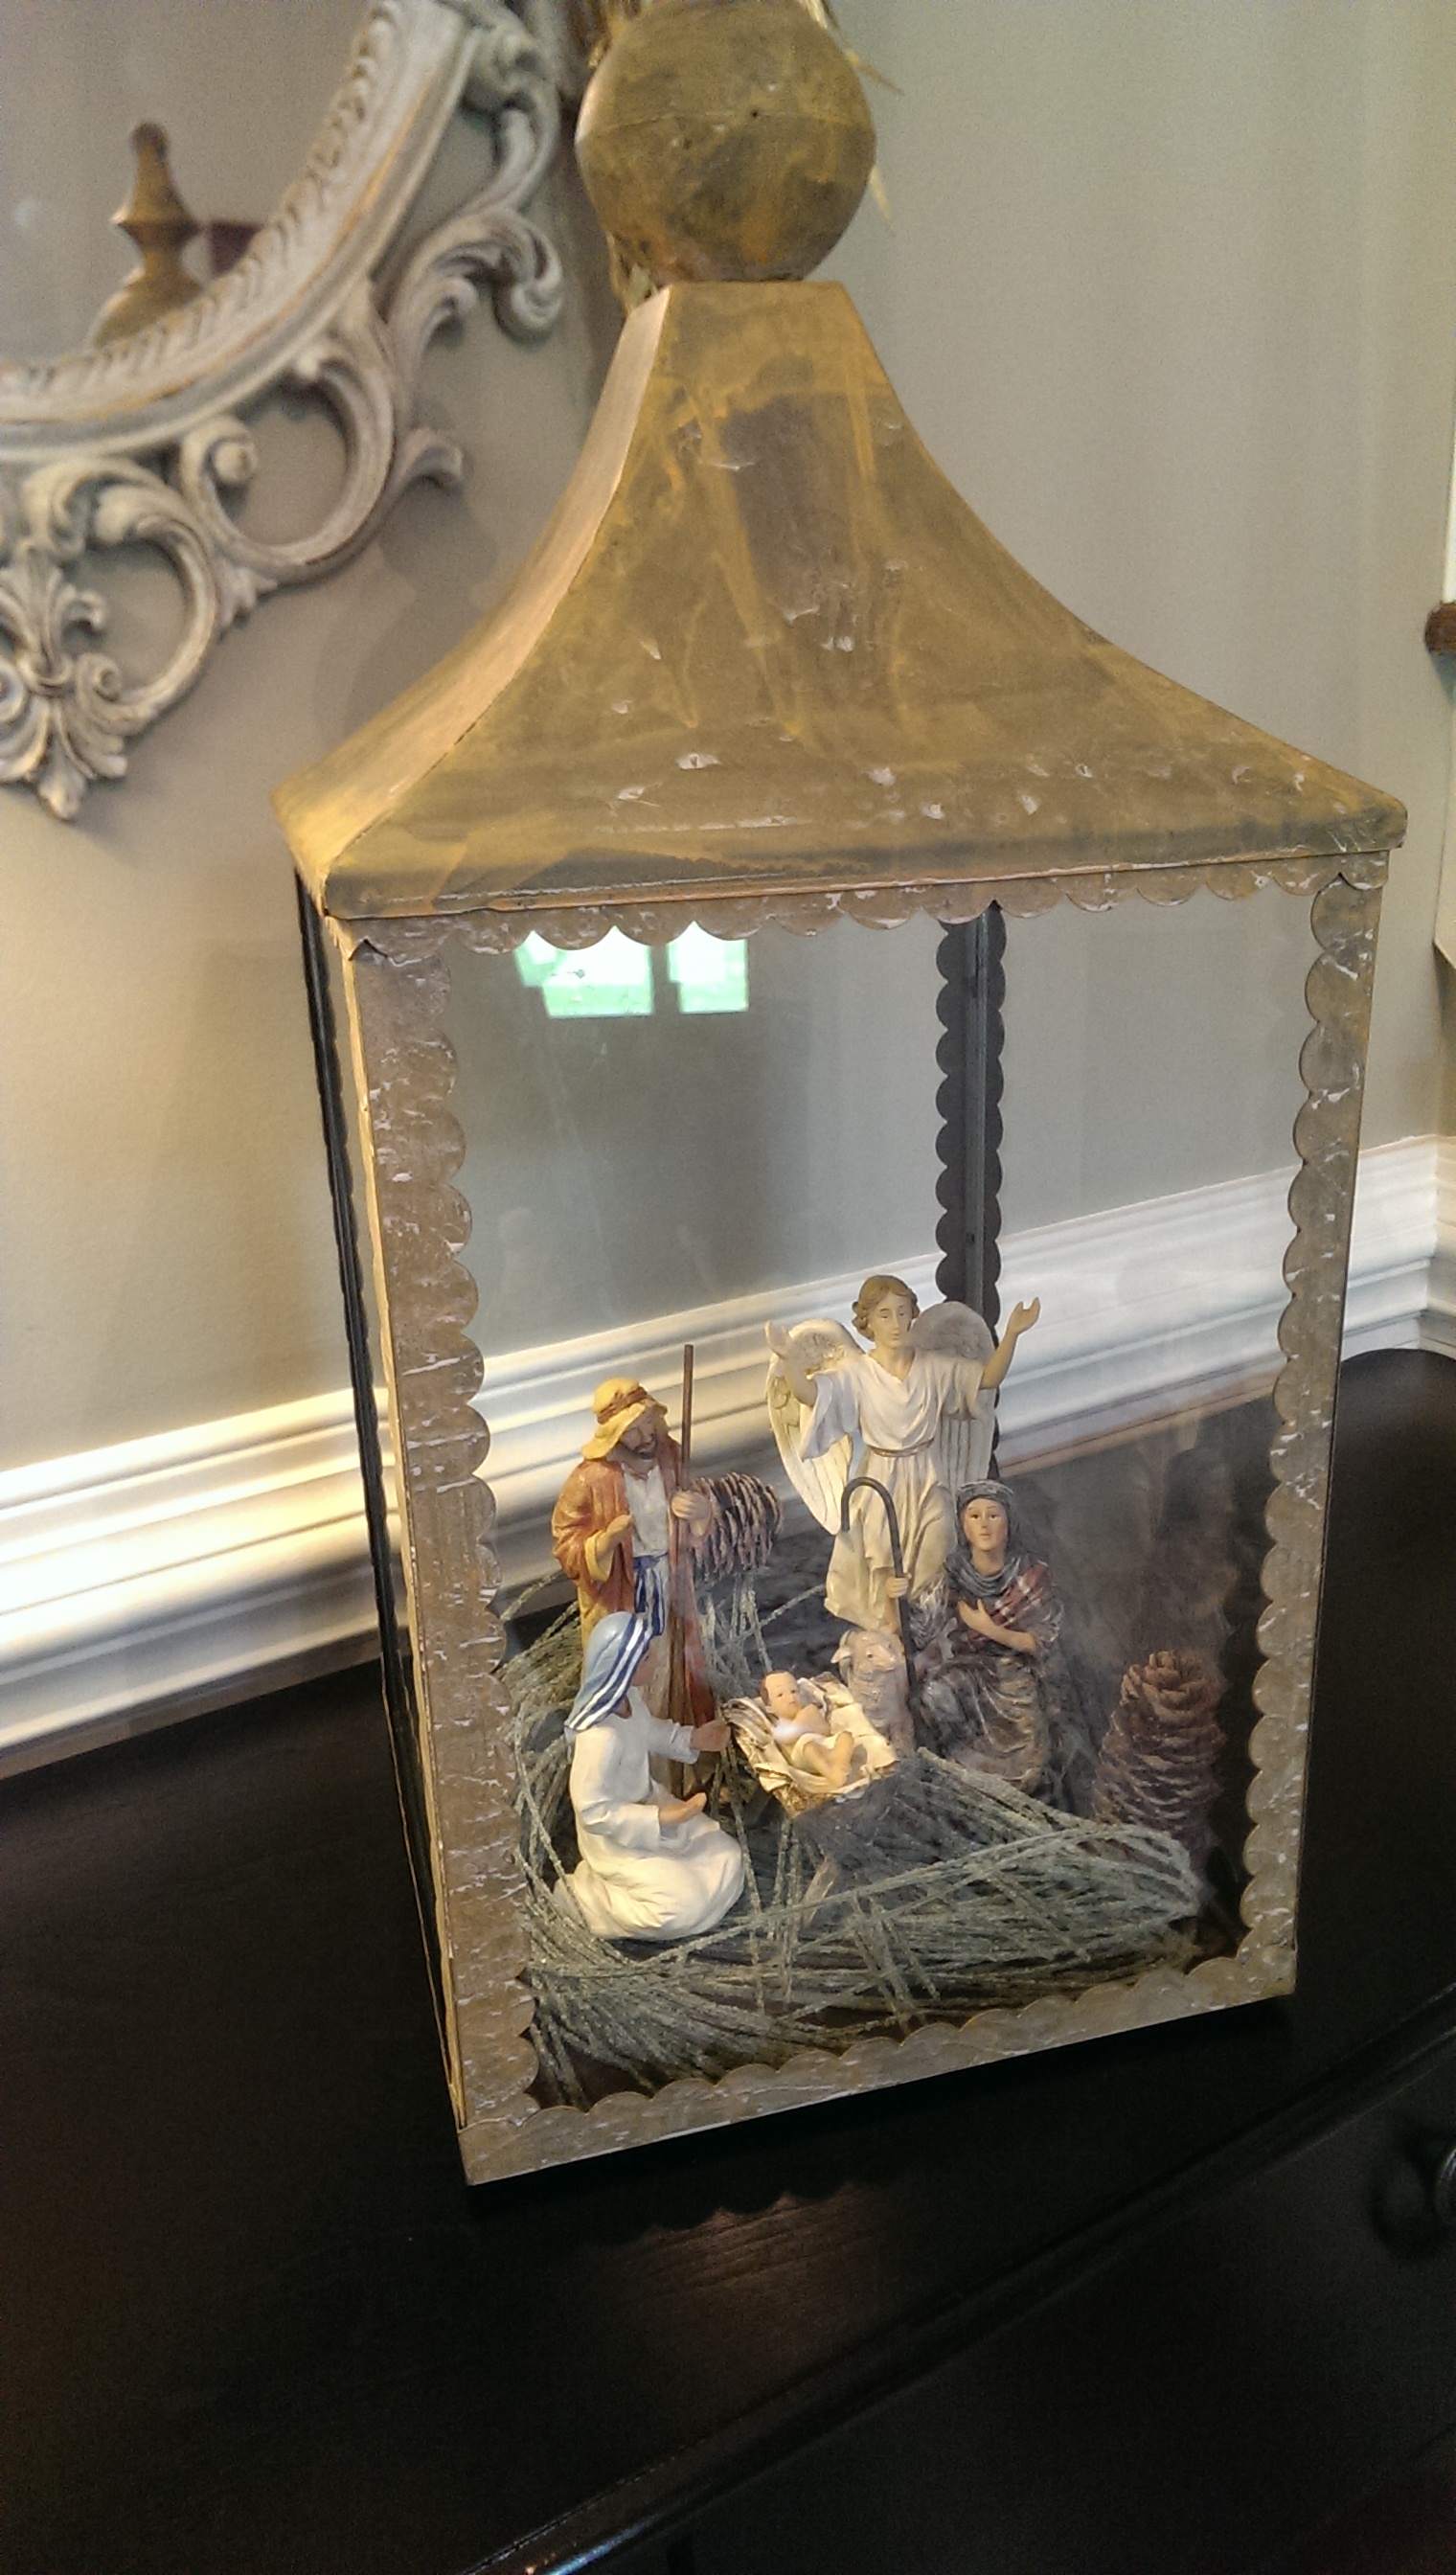 A few nativity figures look great inside this Chapel Lantern. Just add string lights!